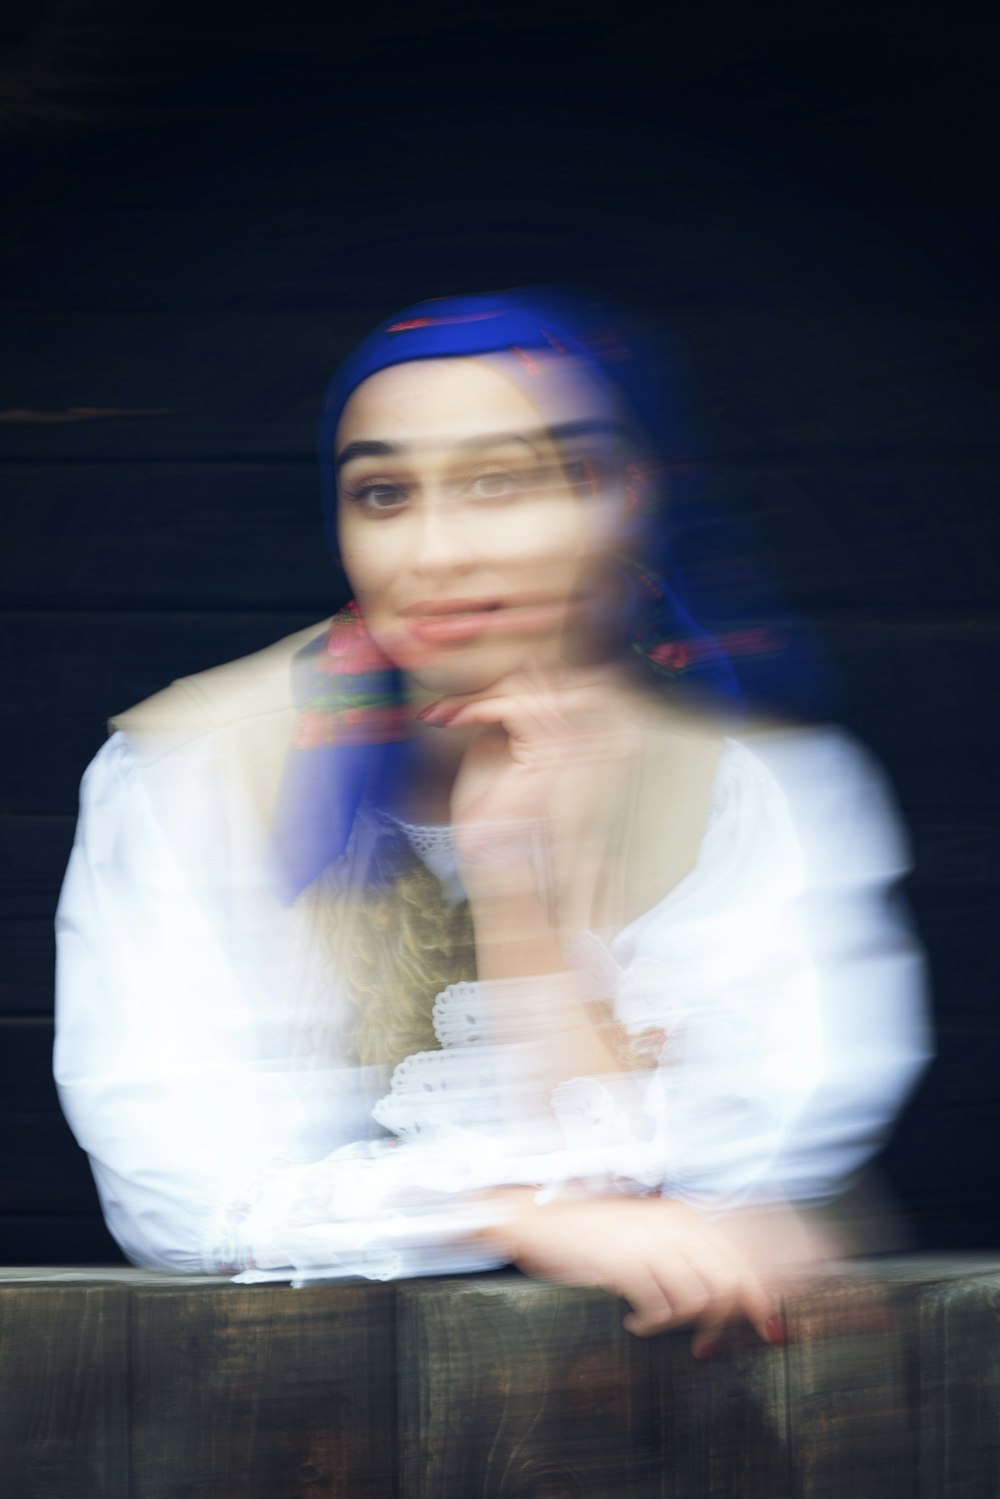 a blurry photo of a woman with blue hair